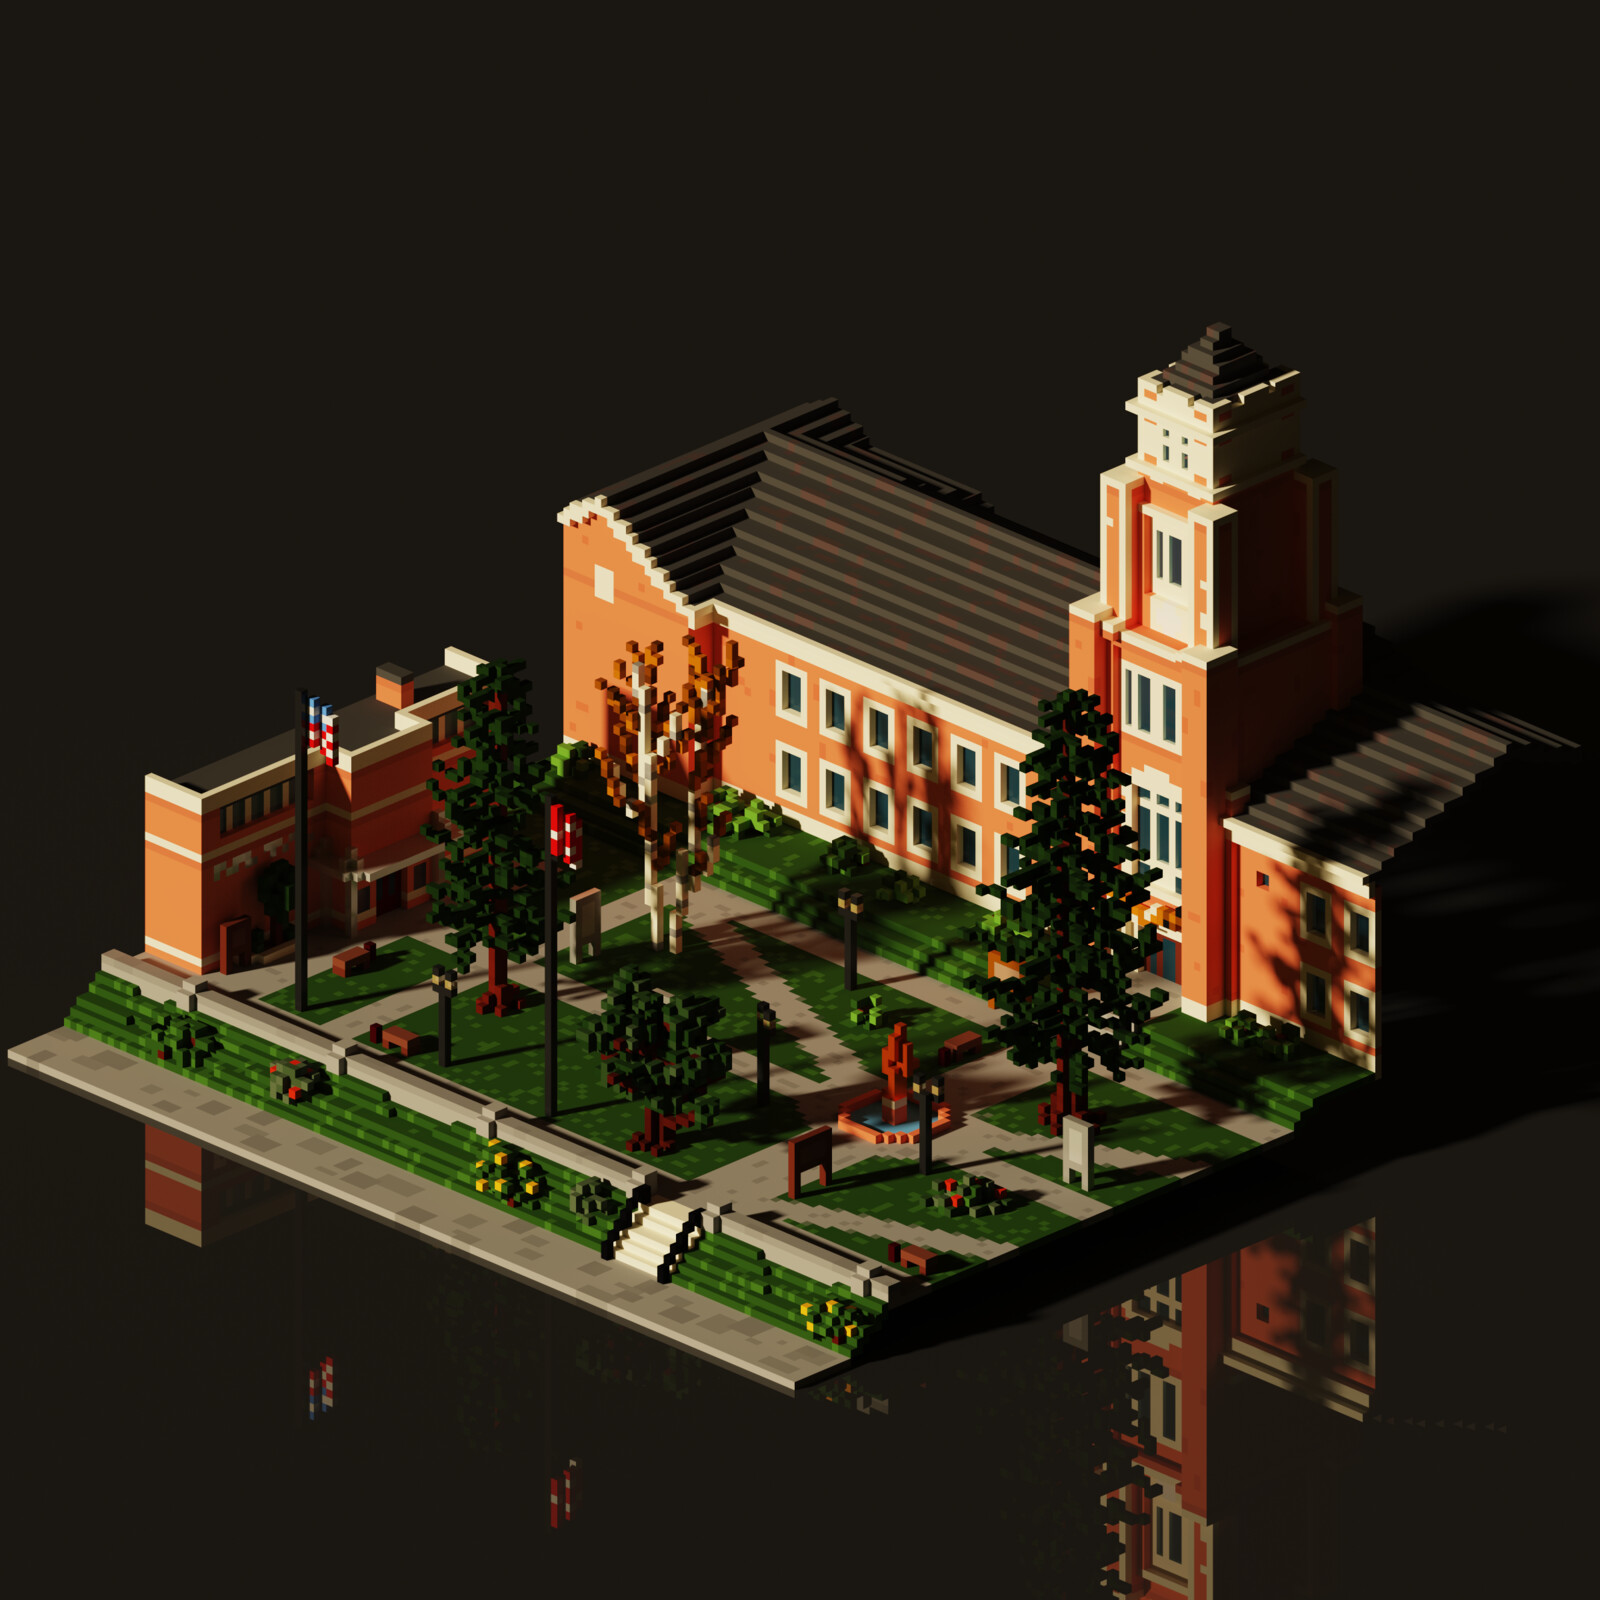 Late afternoon, Blackwell Academy
MagicaVoxel render - May 2020